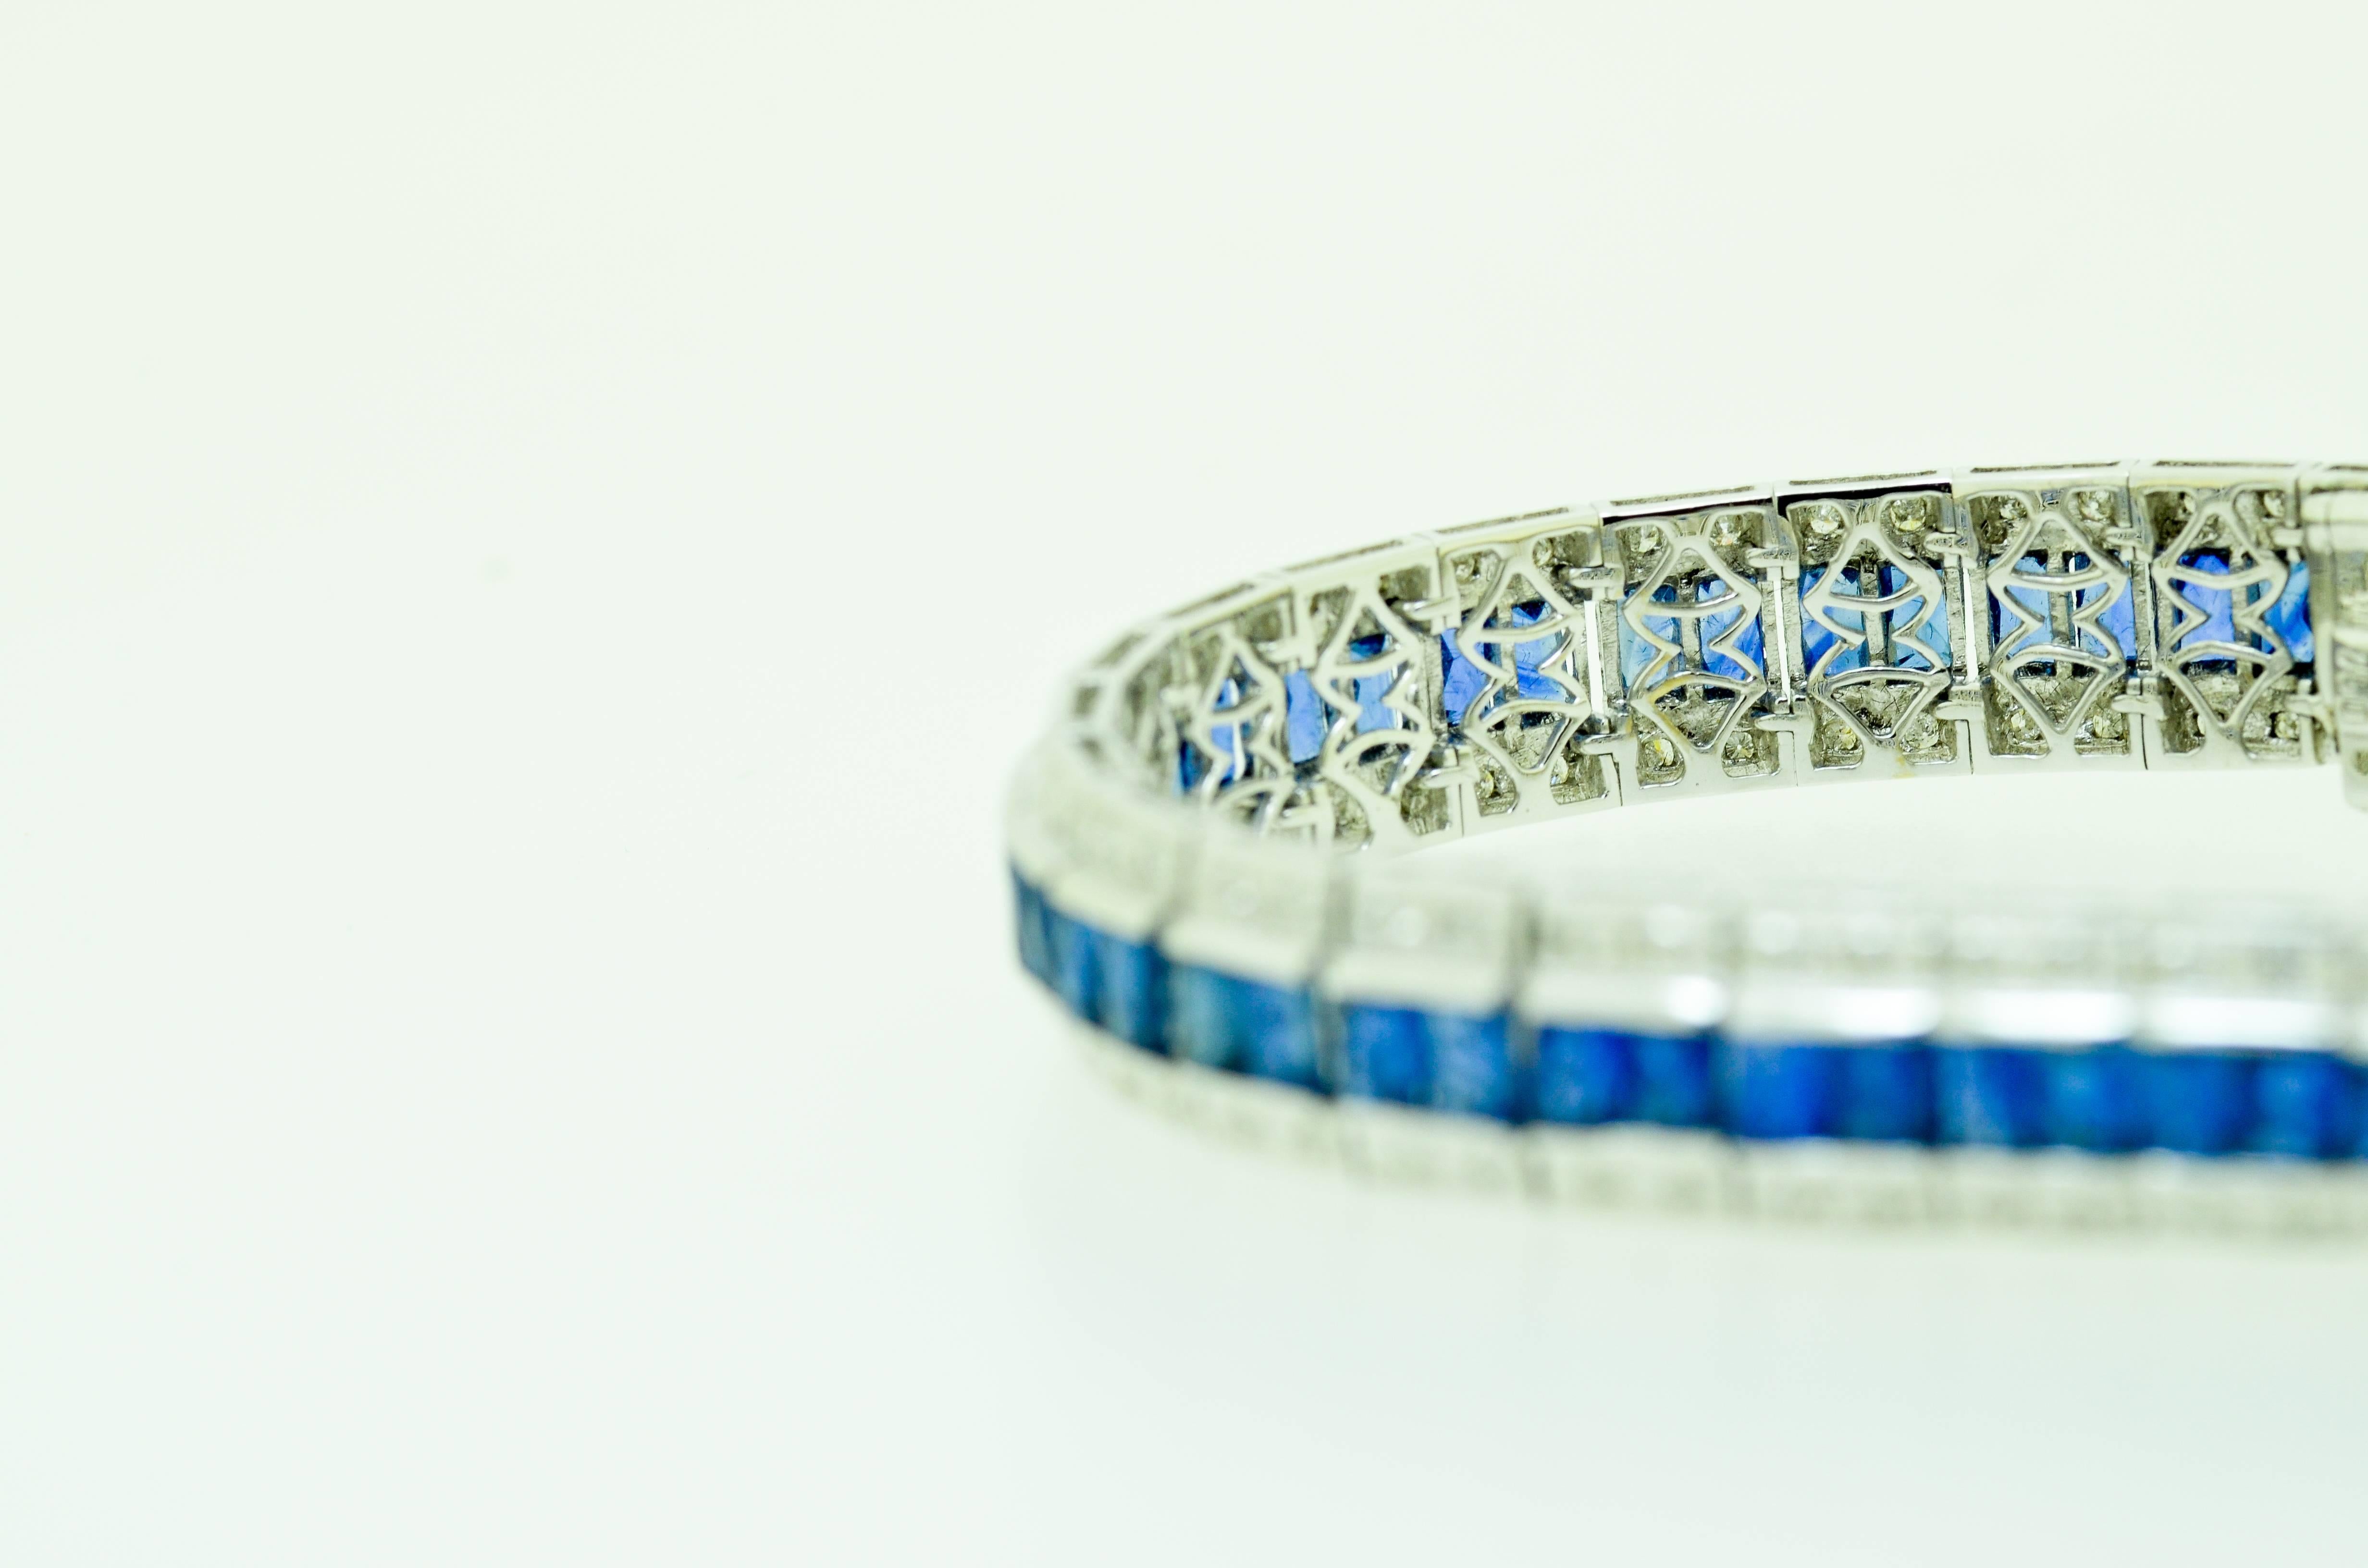 Stunning sapphire and diamond bracelet set with over 10 carats of baguette cut blue sapphires and 0.830 carat of clean white brilliant cut diamonds set in 18 karat white gold.
